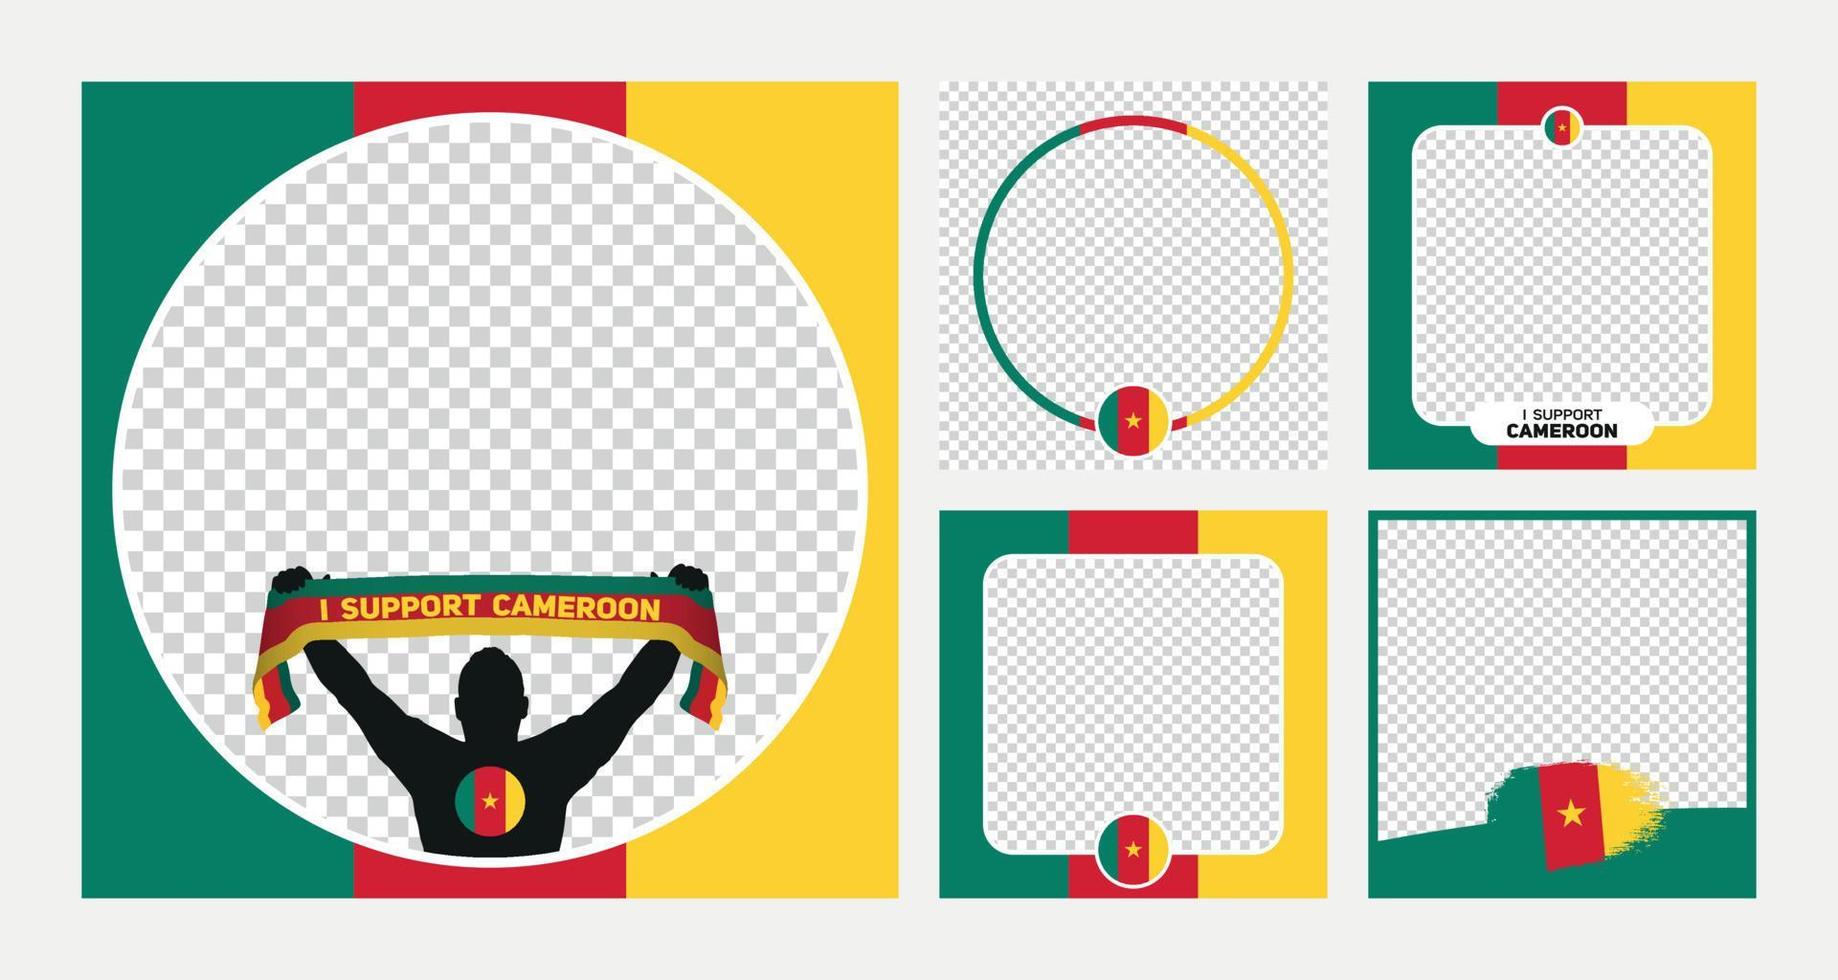 I support Cameroon world football championship profil picture frame banners for social media vector